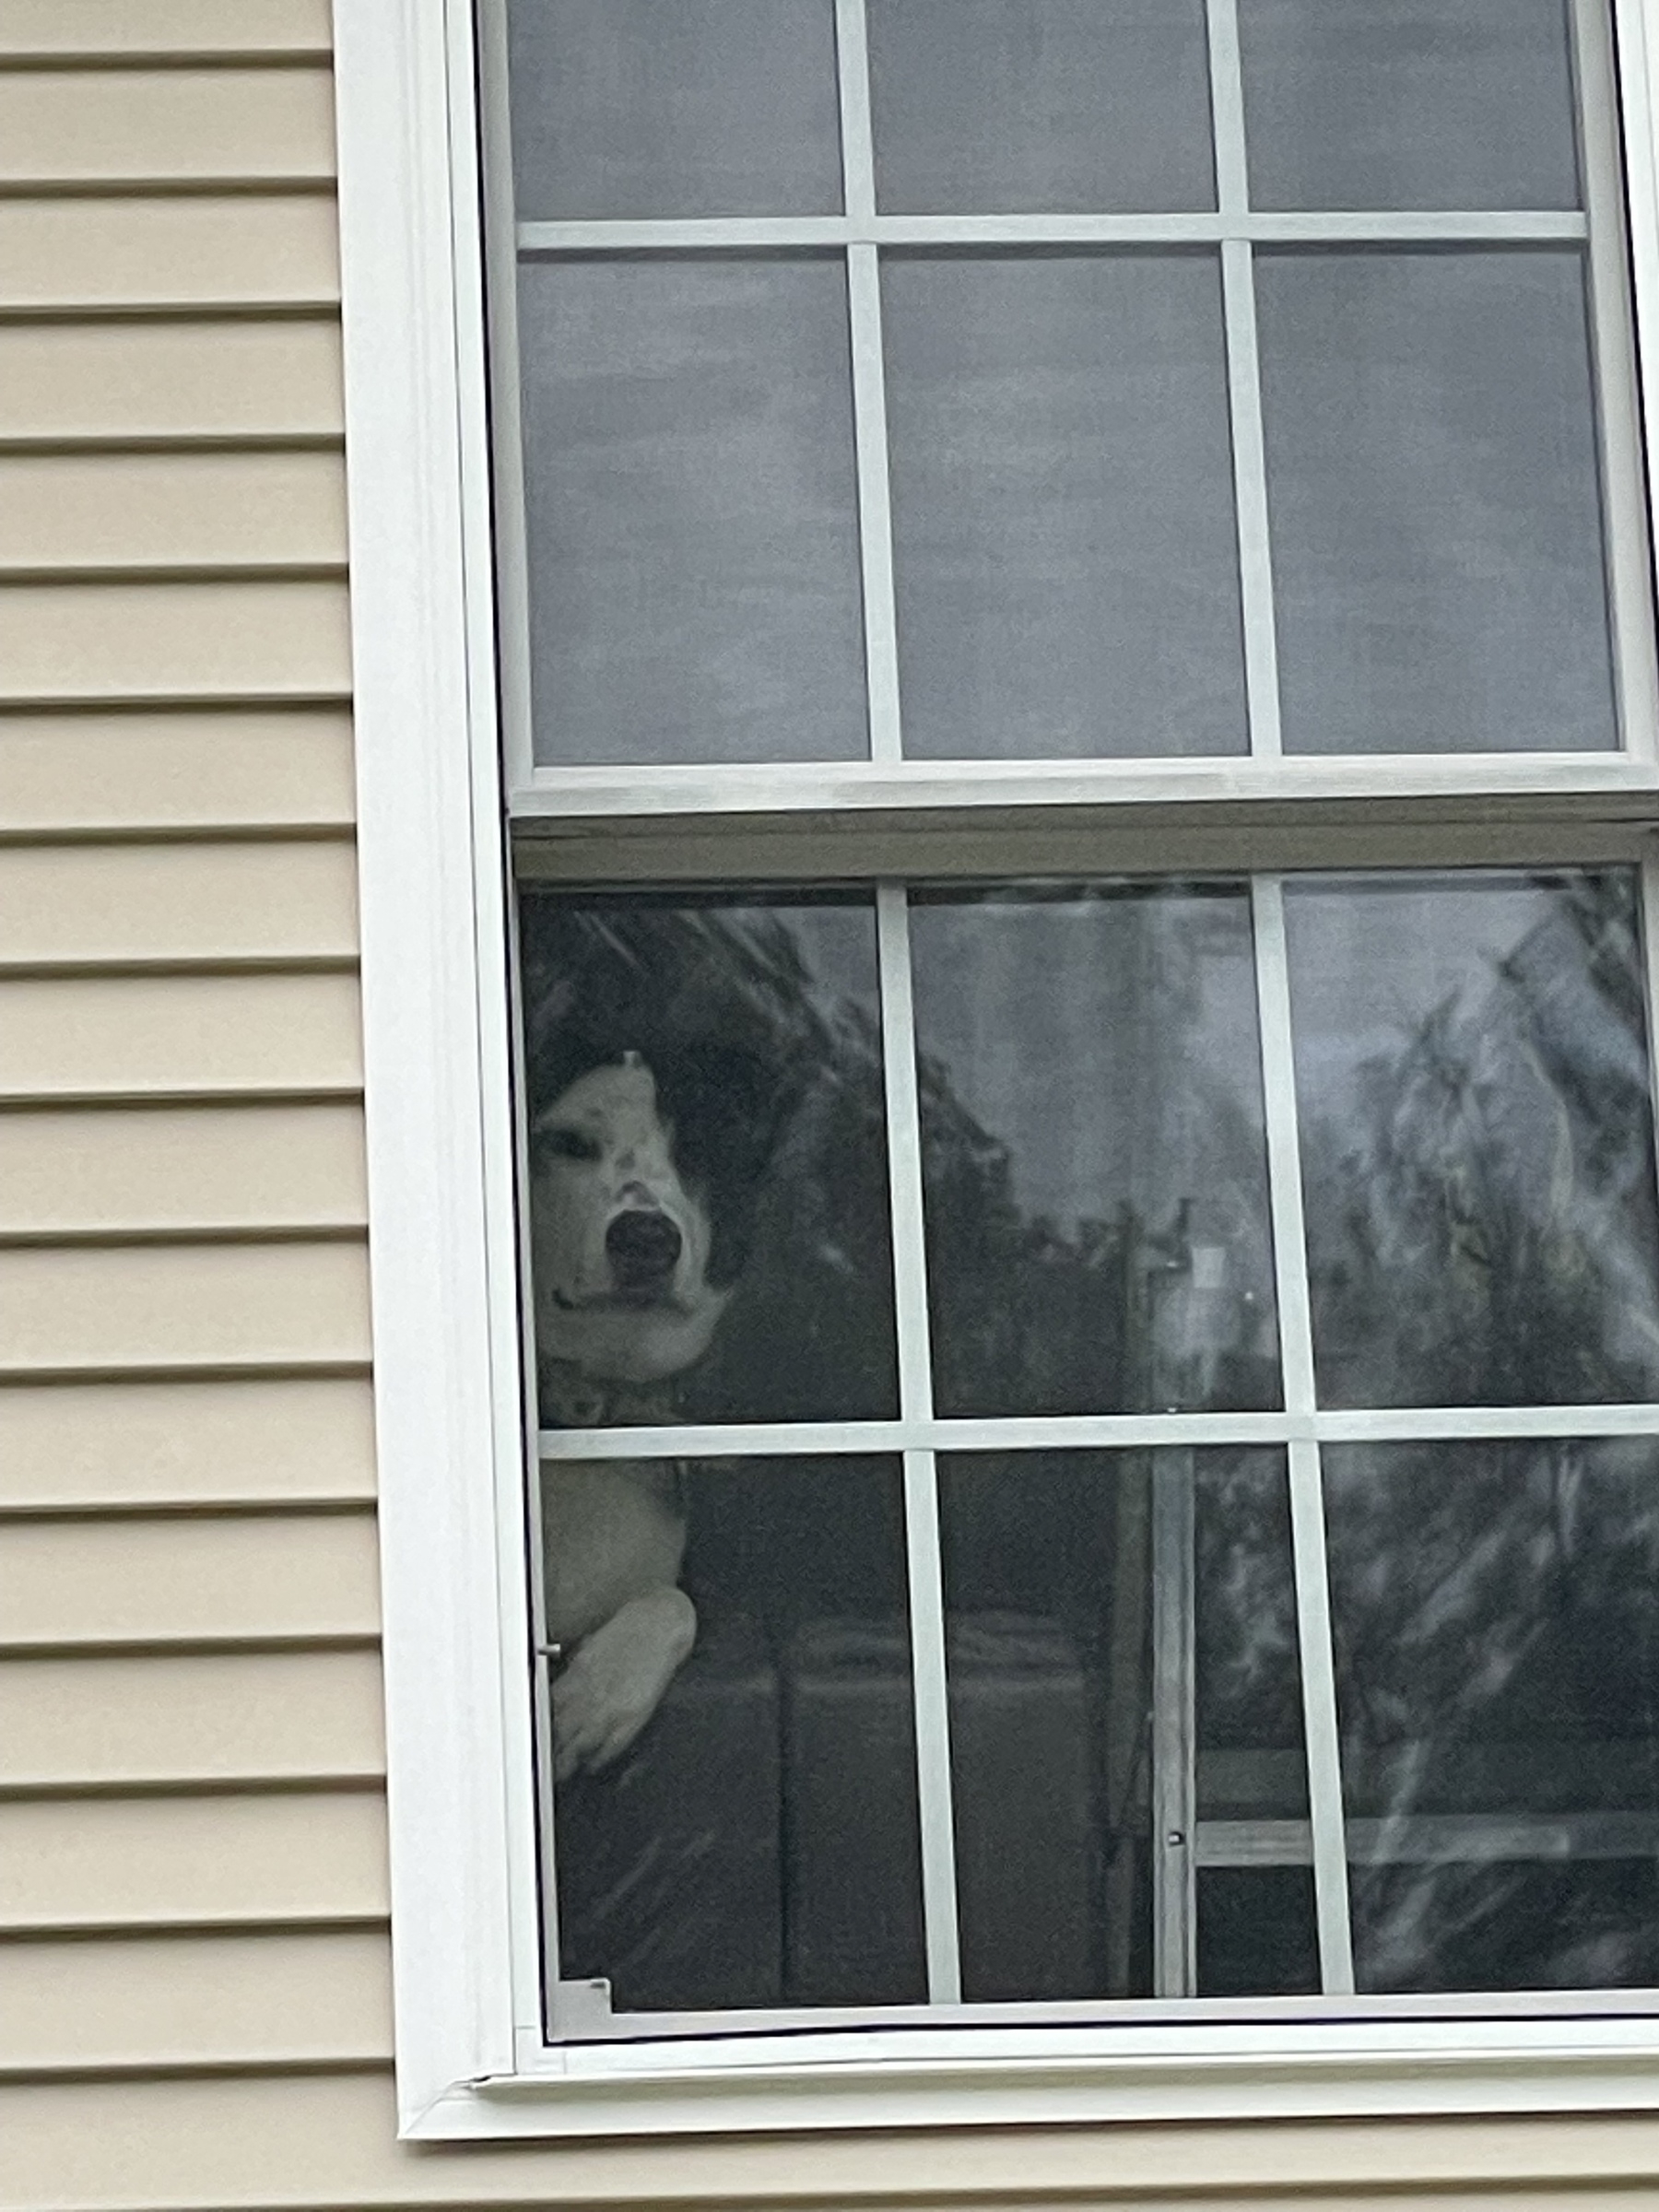 Zoomed in on window to see a dog leaning over a sofa to watch the action outside